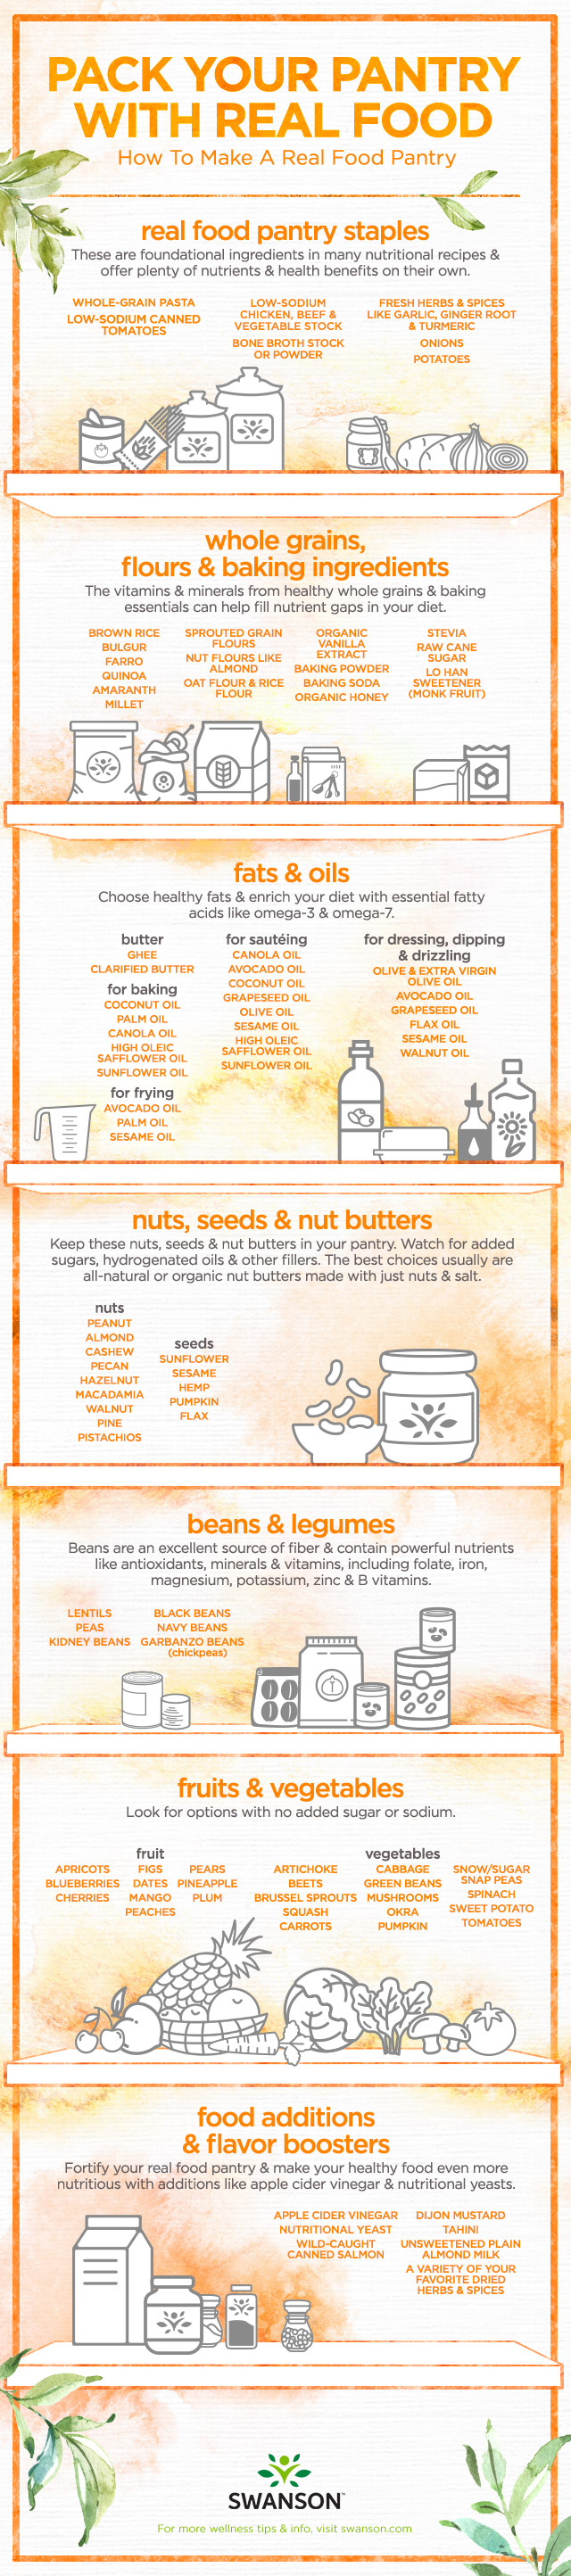 How to Make a Real Food Pantry Infographic by Swanson Health